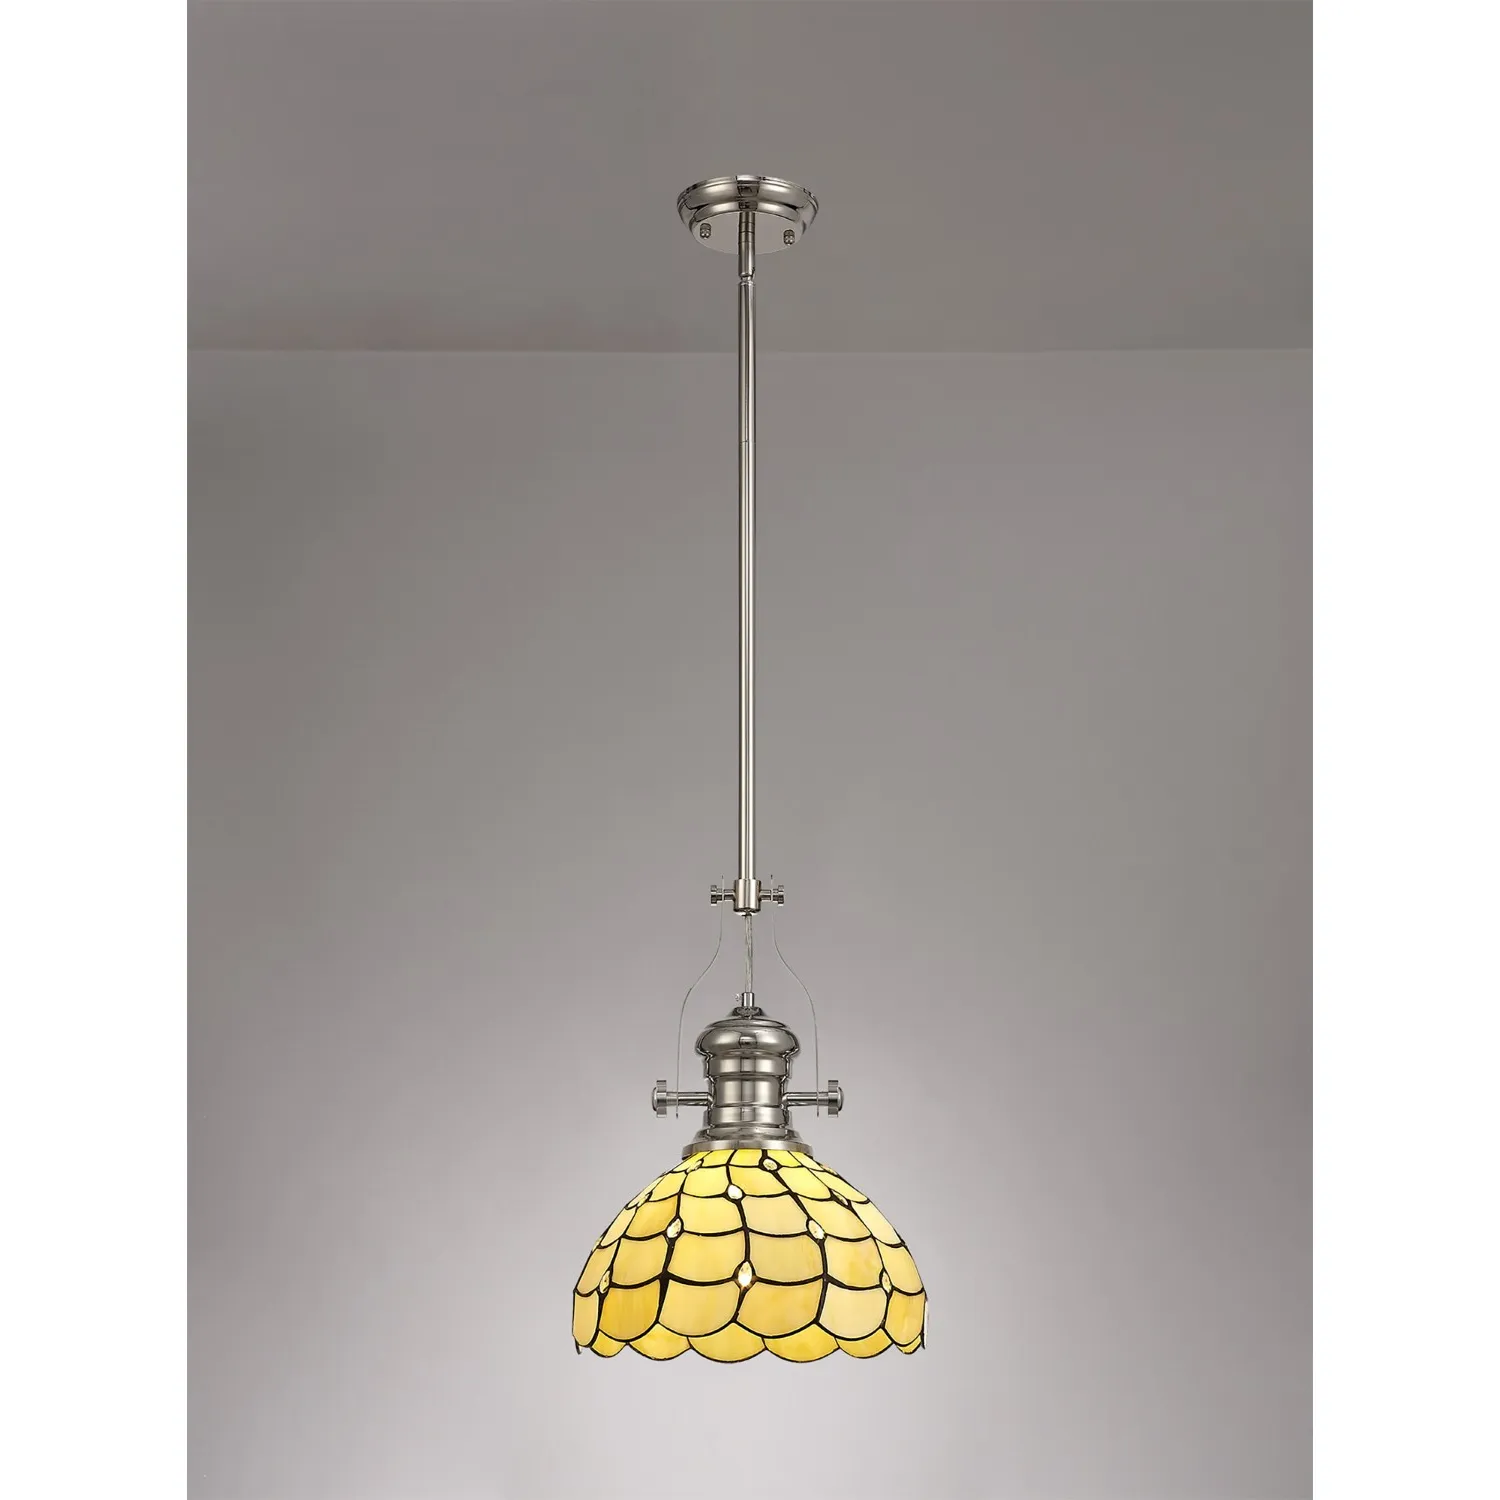 Stratford 1 Light Pendant E27 With 30cm Tiffany Shade, Polished Nickel Beige Clear Crystal